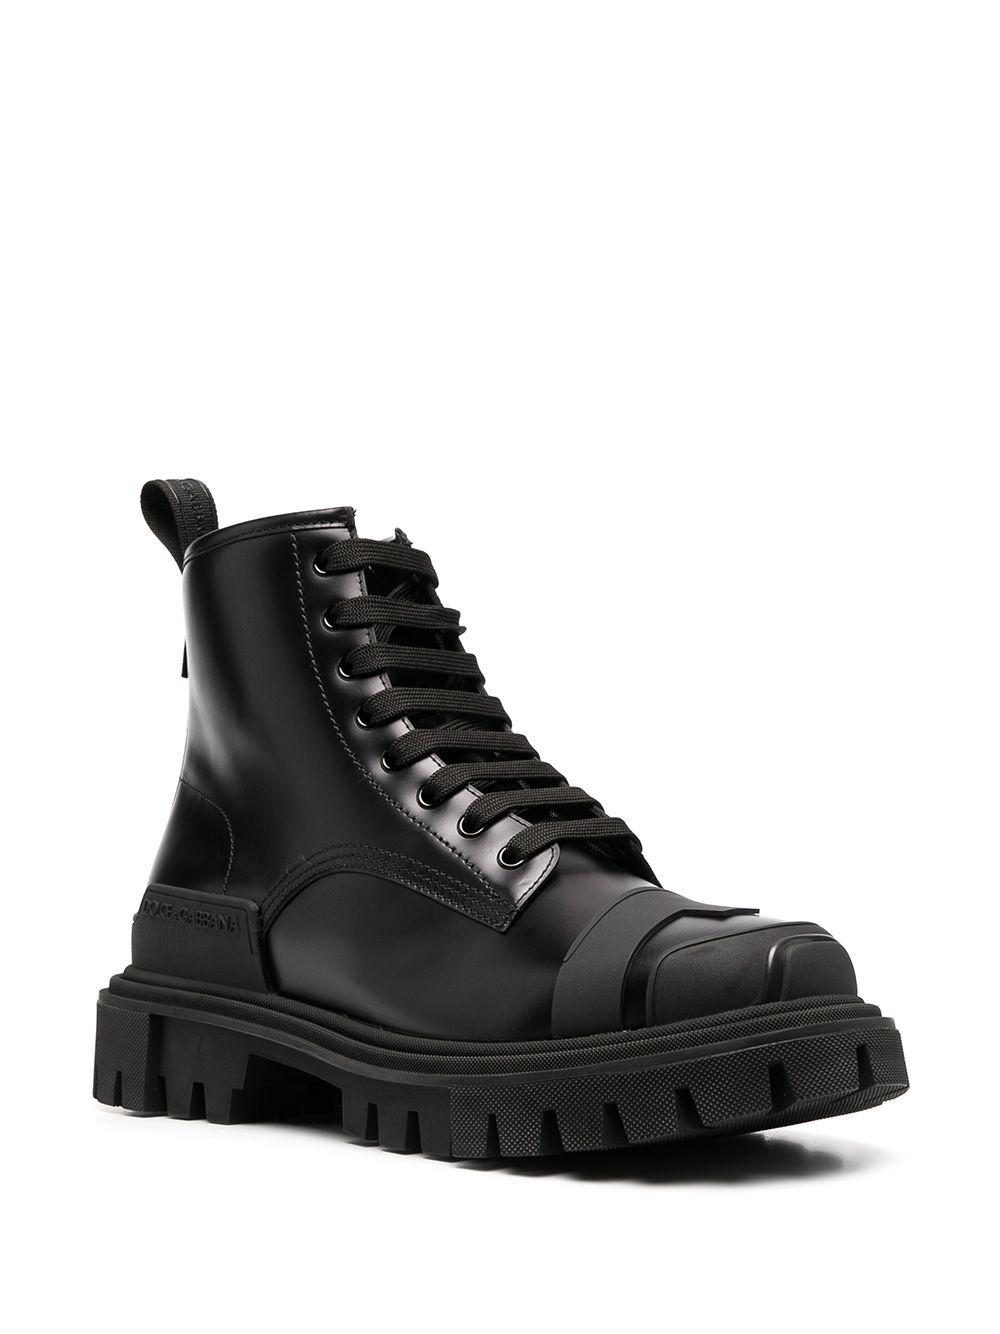 Dolce & Gabbana Leather Chunky Trekking Boots in Black for Men - Lyst